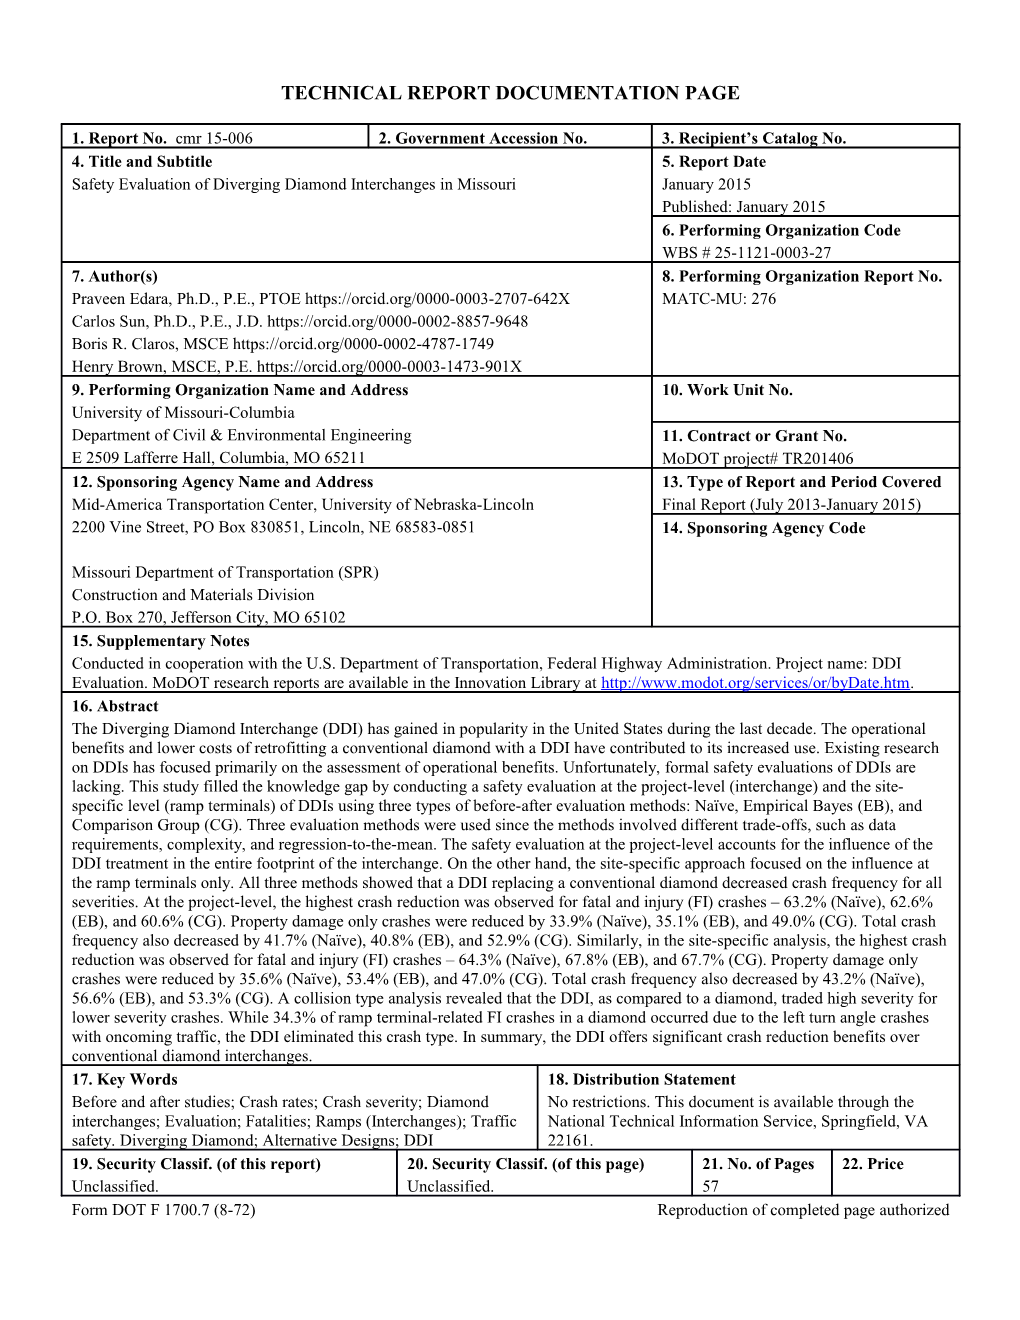 Technical Report Documentation Page Modot Version Example